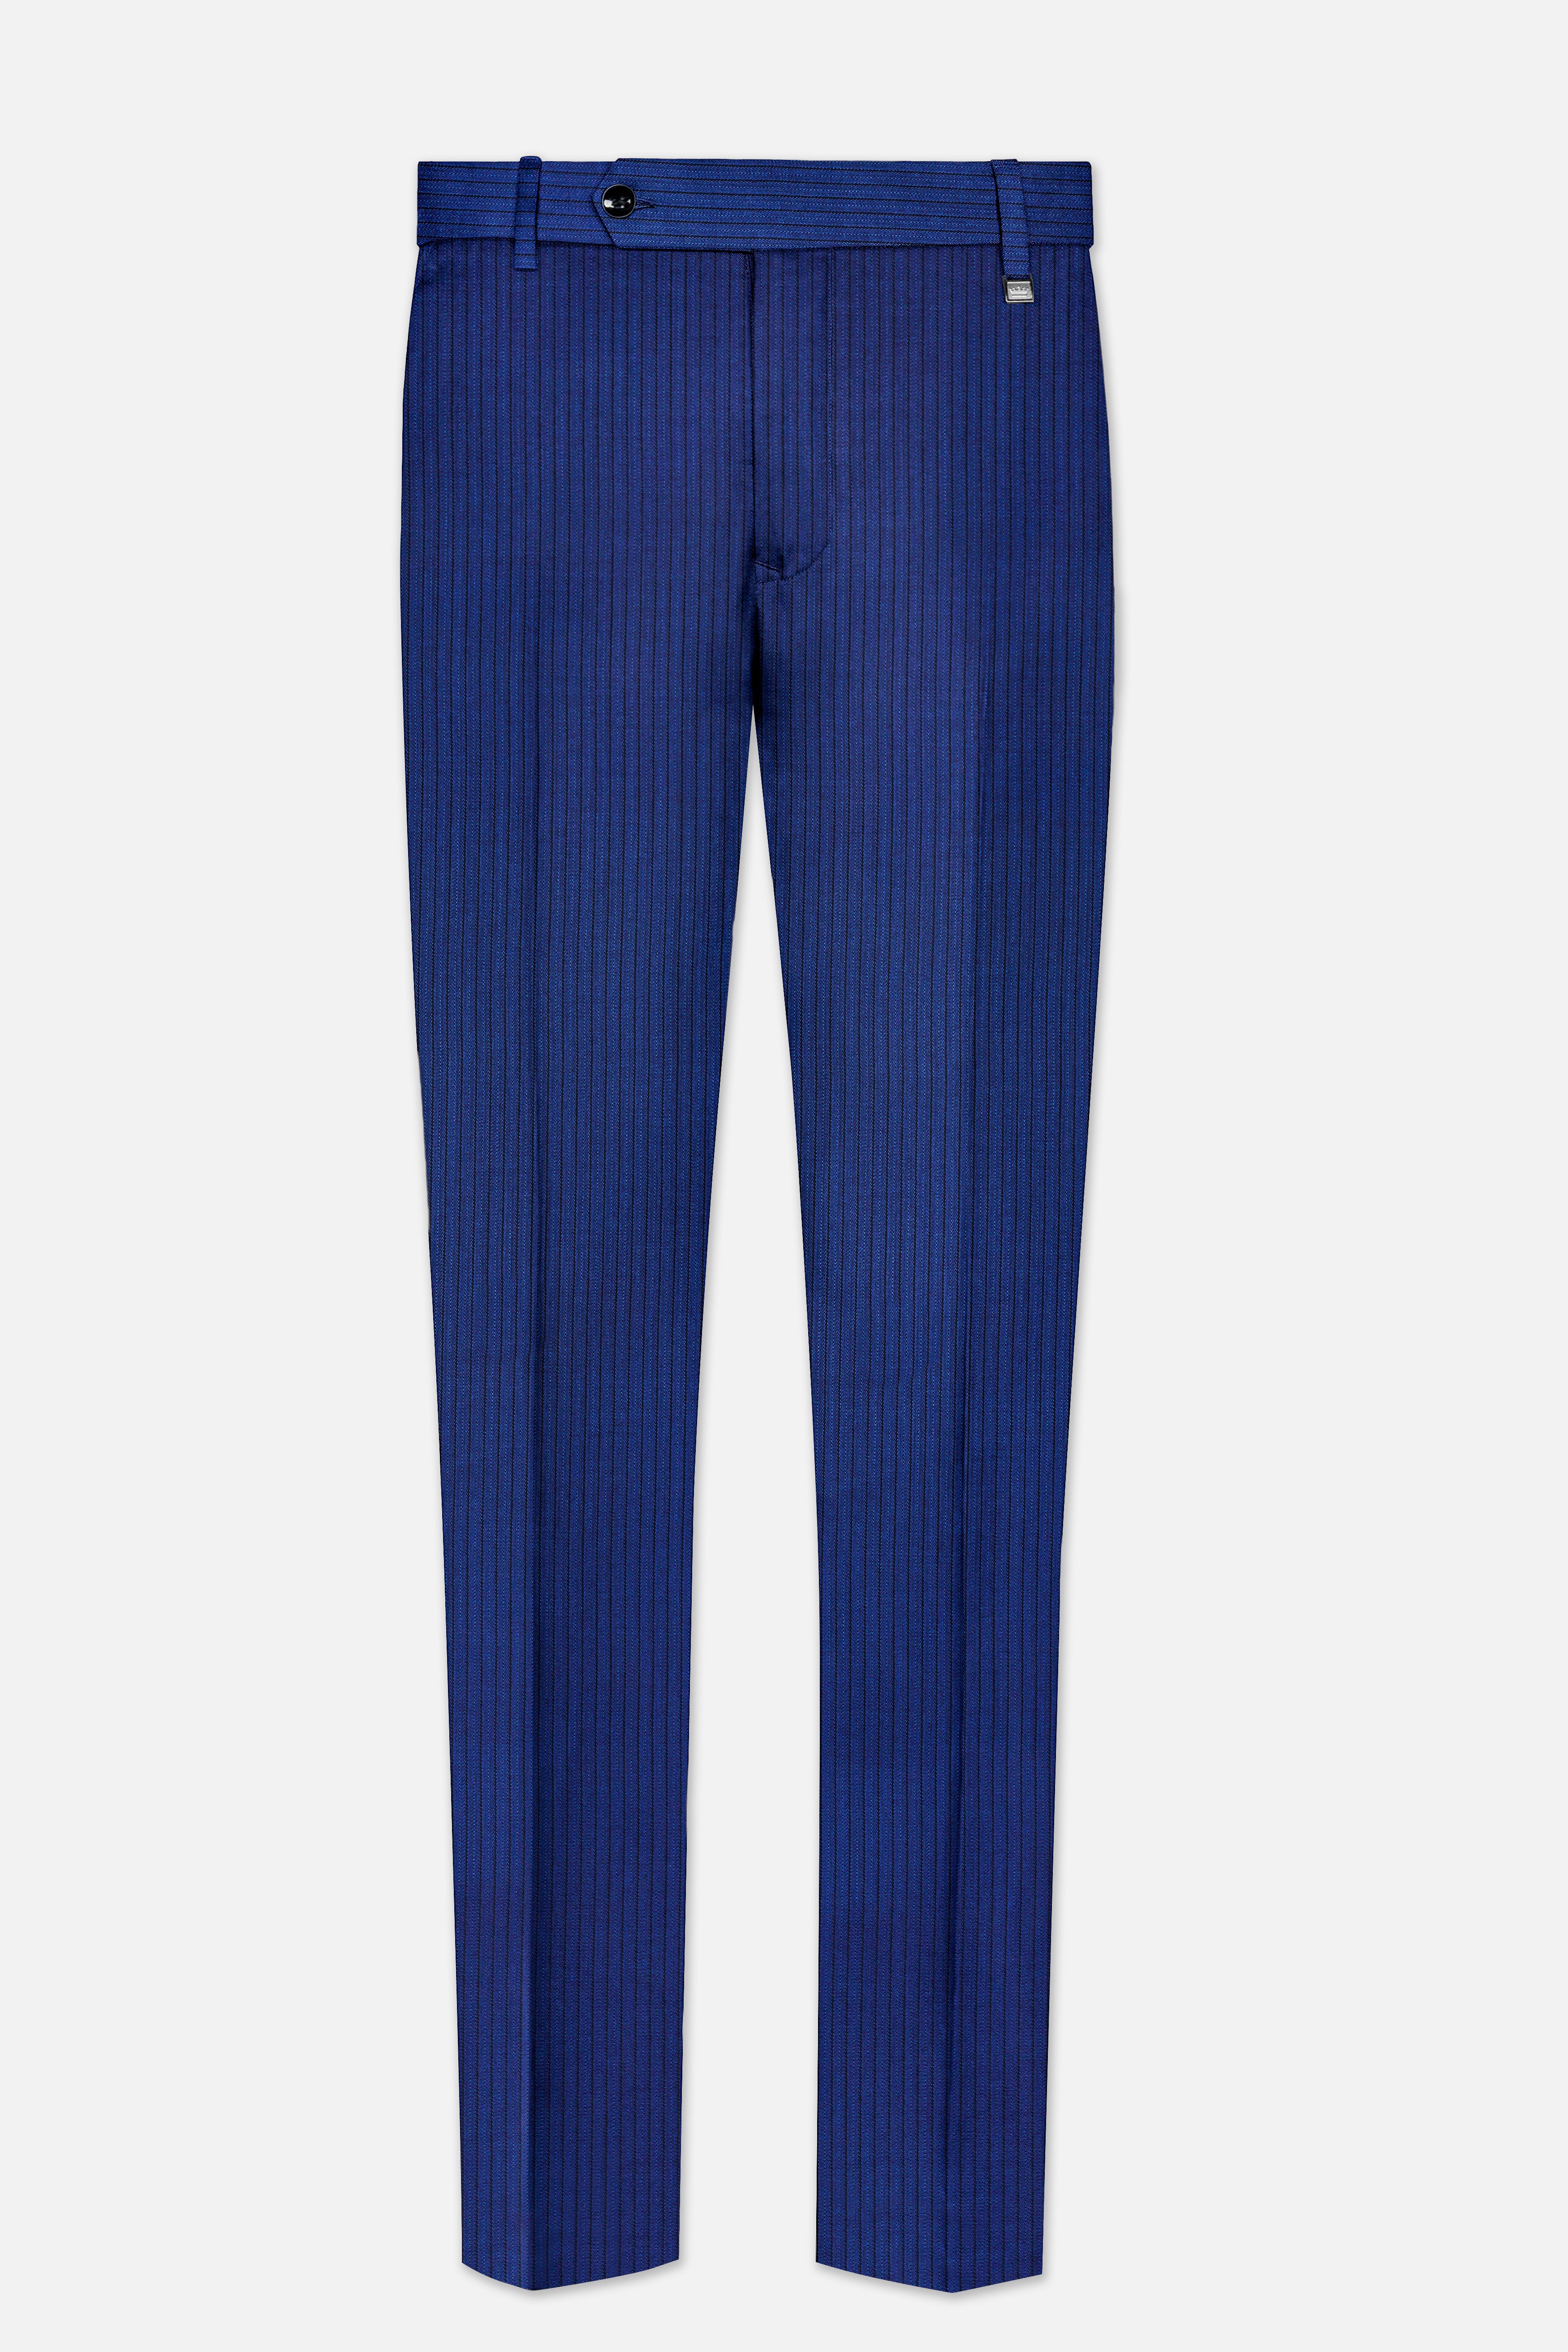 Bunting Blue Striped Wool Blend Pant